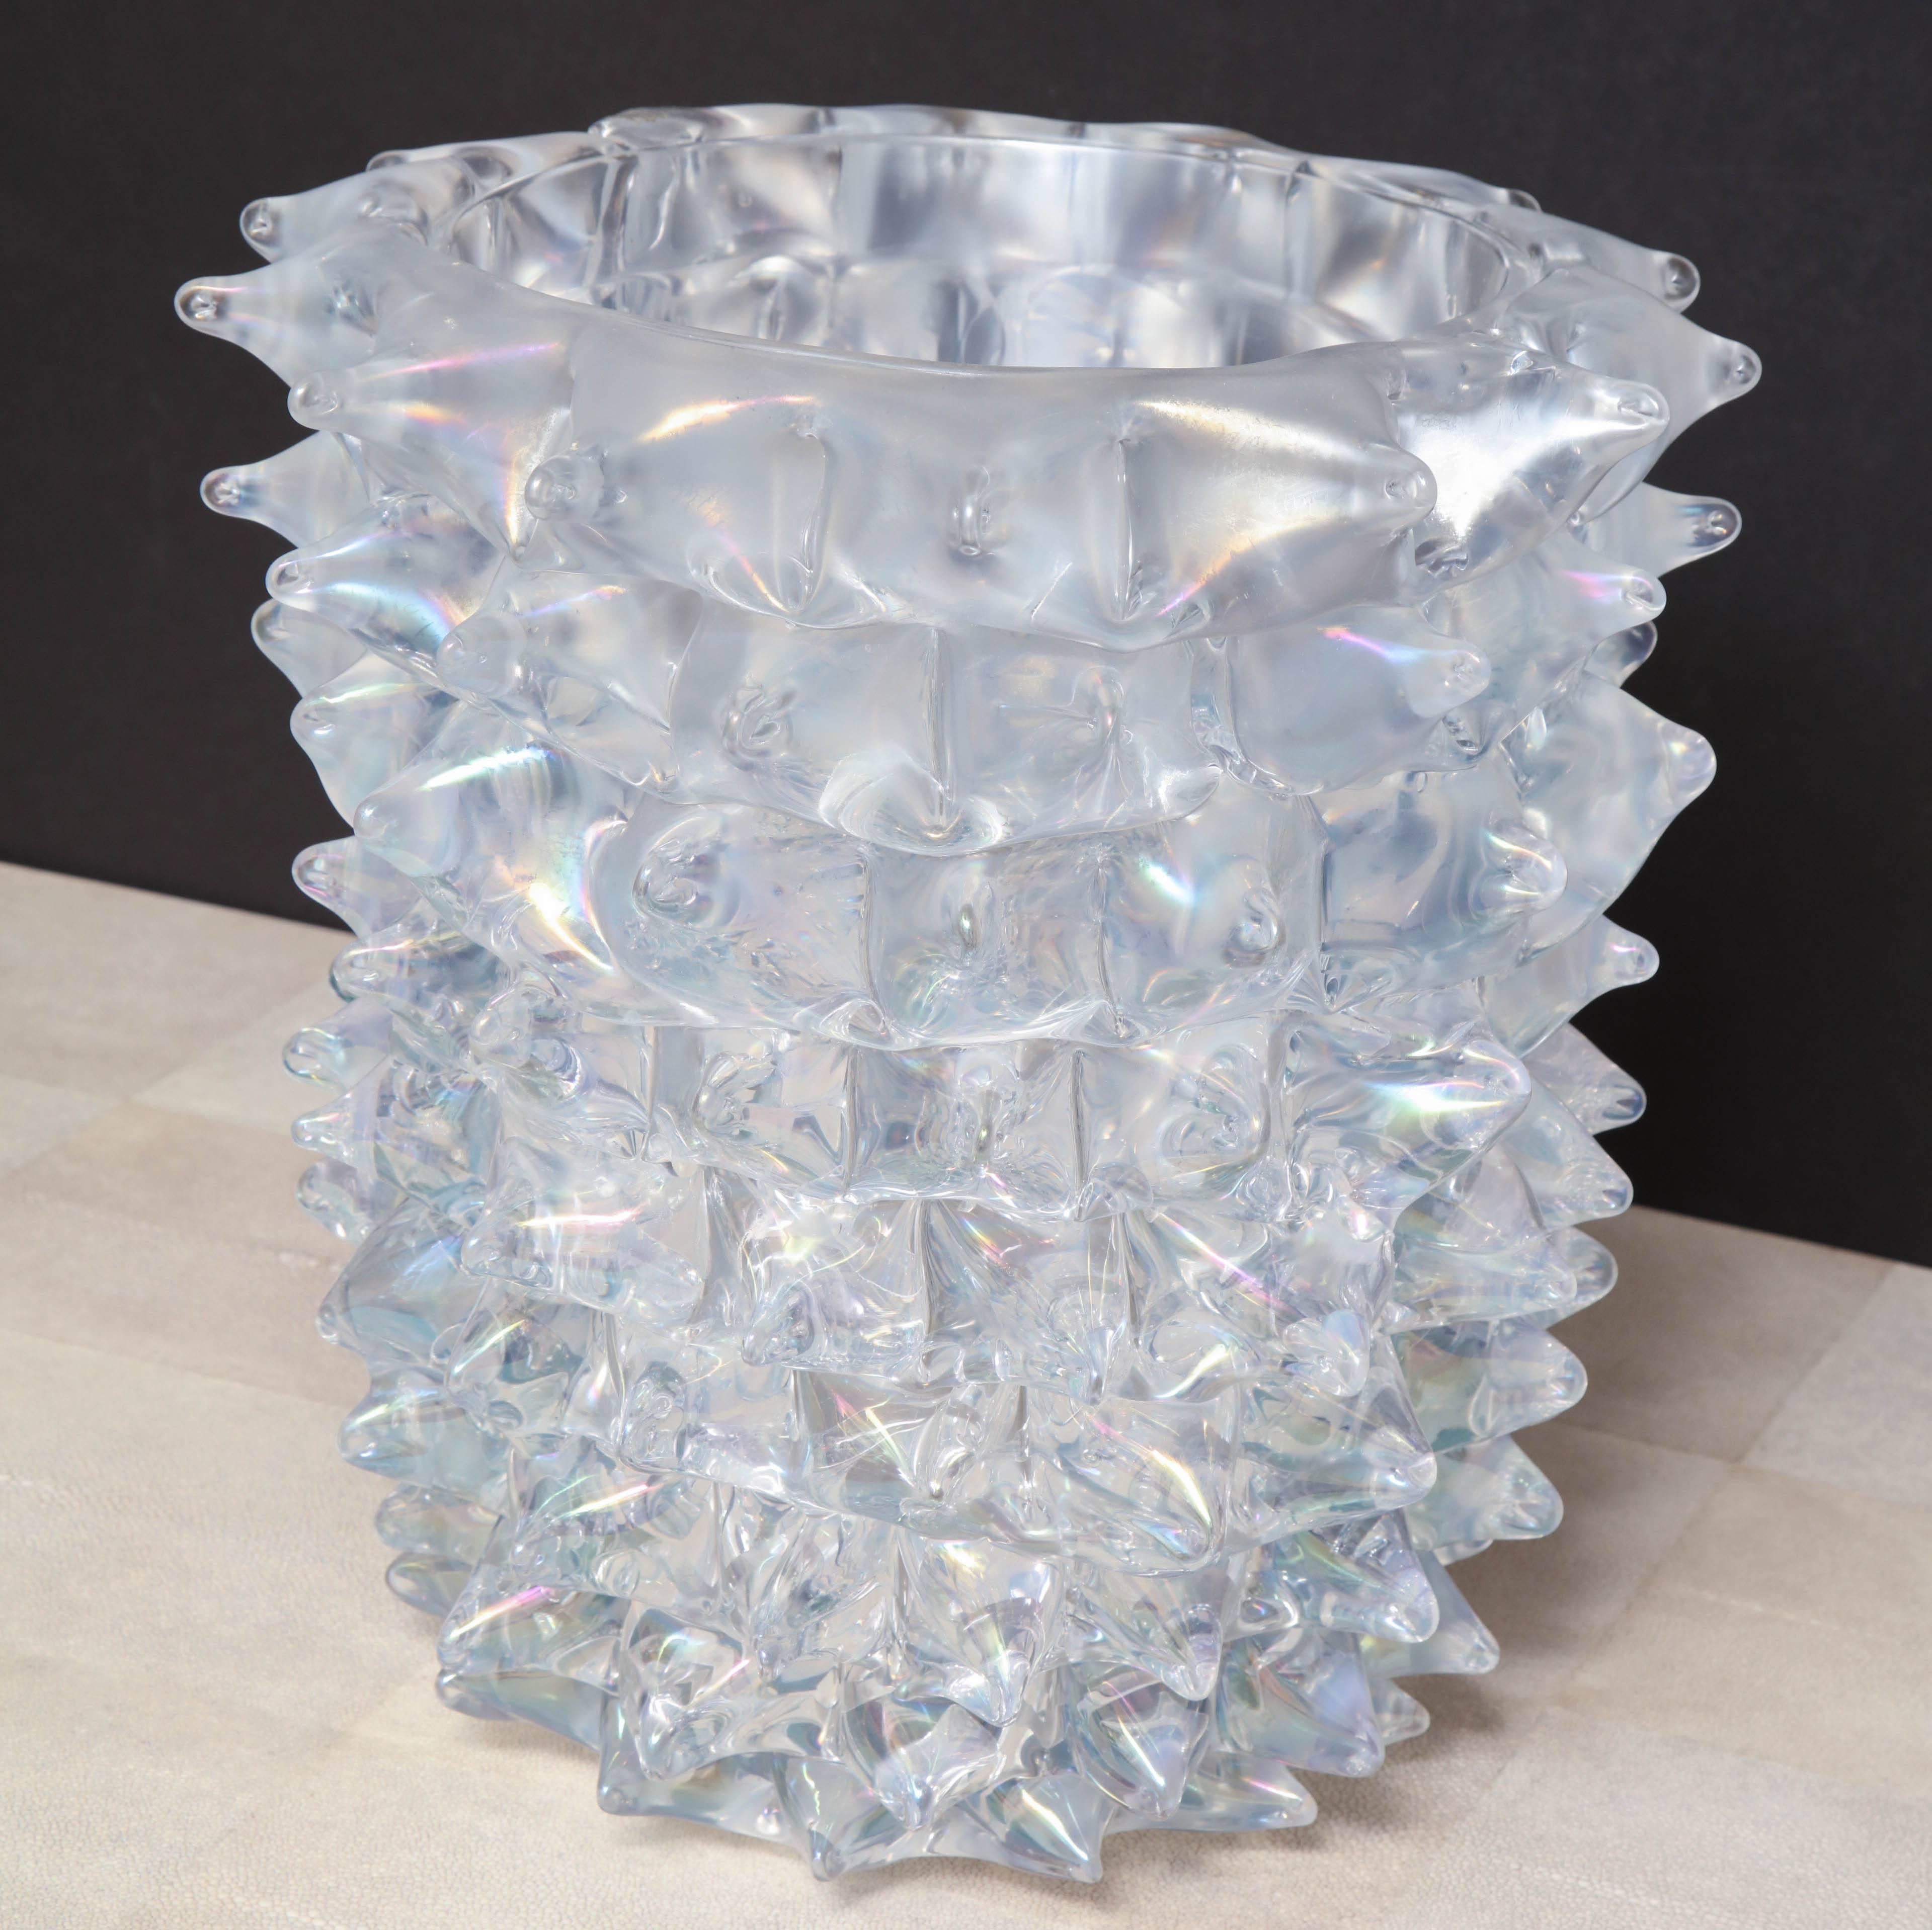 Mid-Century Modern Enormous Signed Sinoretto Murano Iridescent Clear Glass Spiked Vase